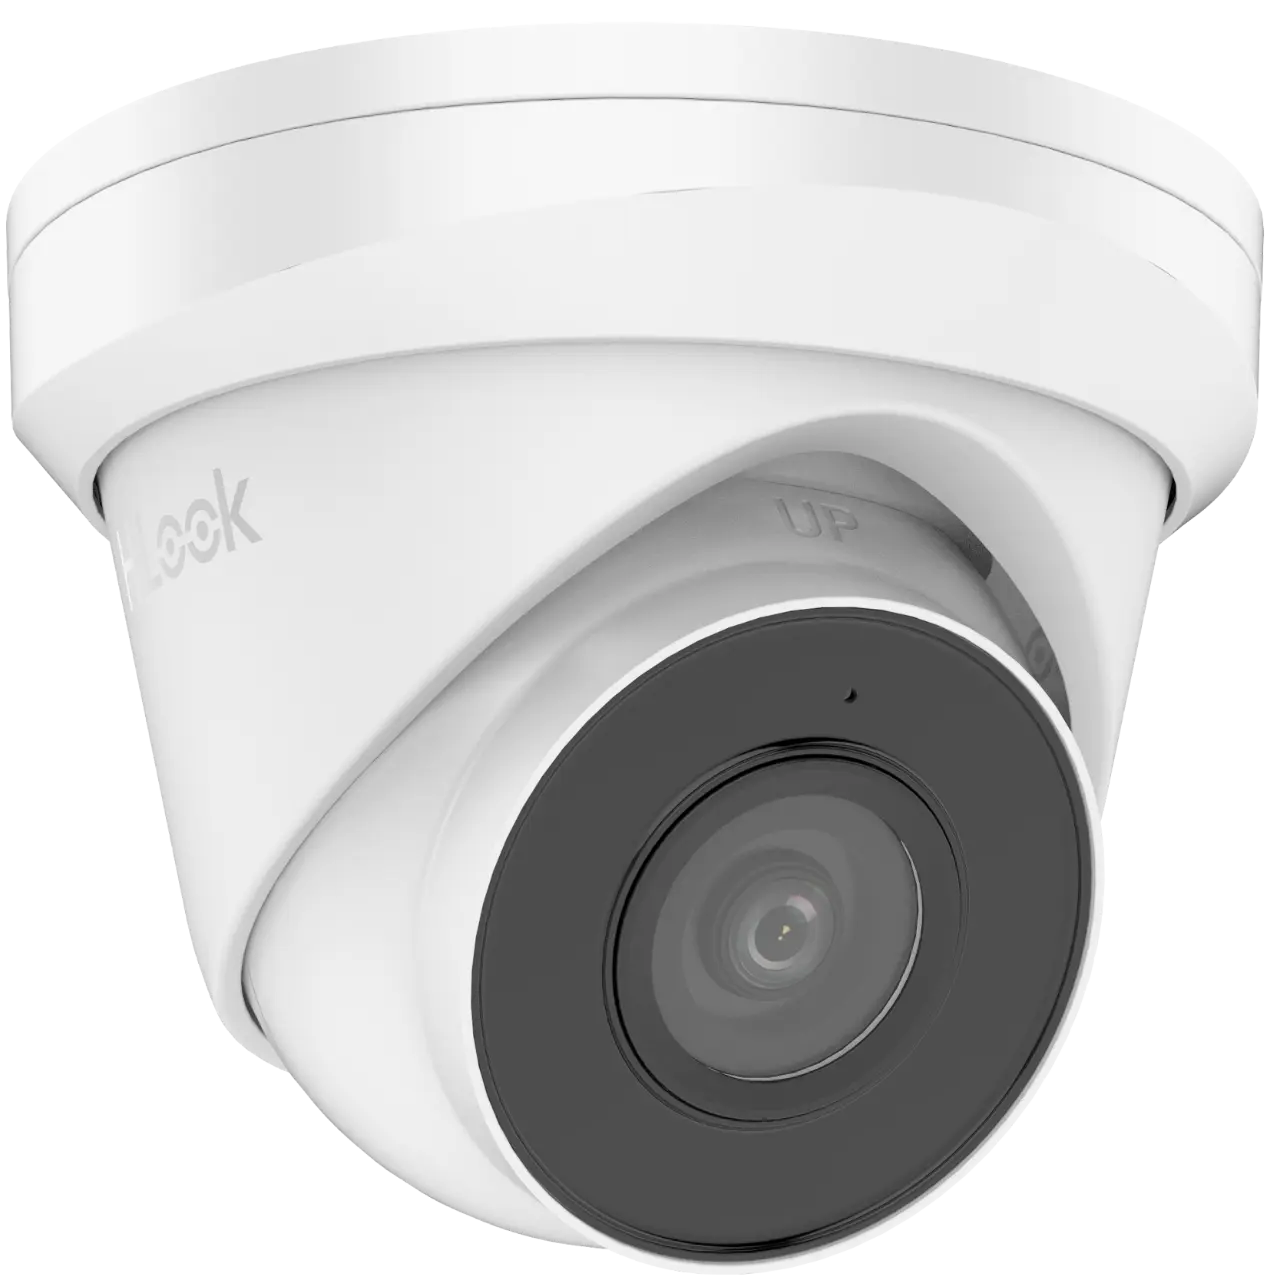 5mp Hikvision Hilook Dome IP Poe Outdoor Camera 2.8mm WhiteIPC-T250H-MU(2.8MM)(C)